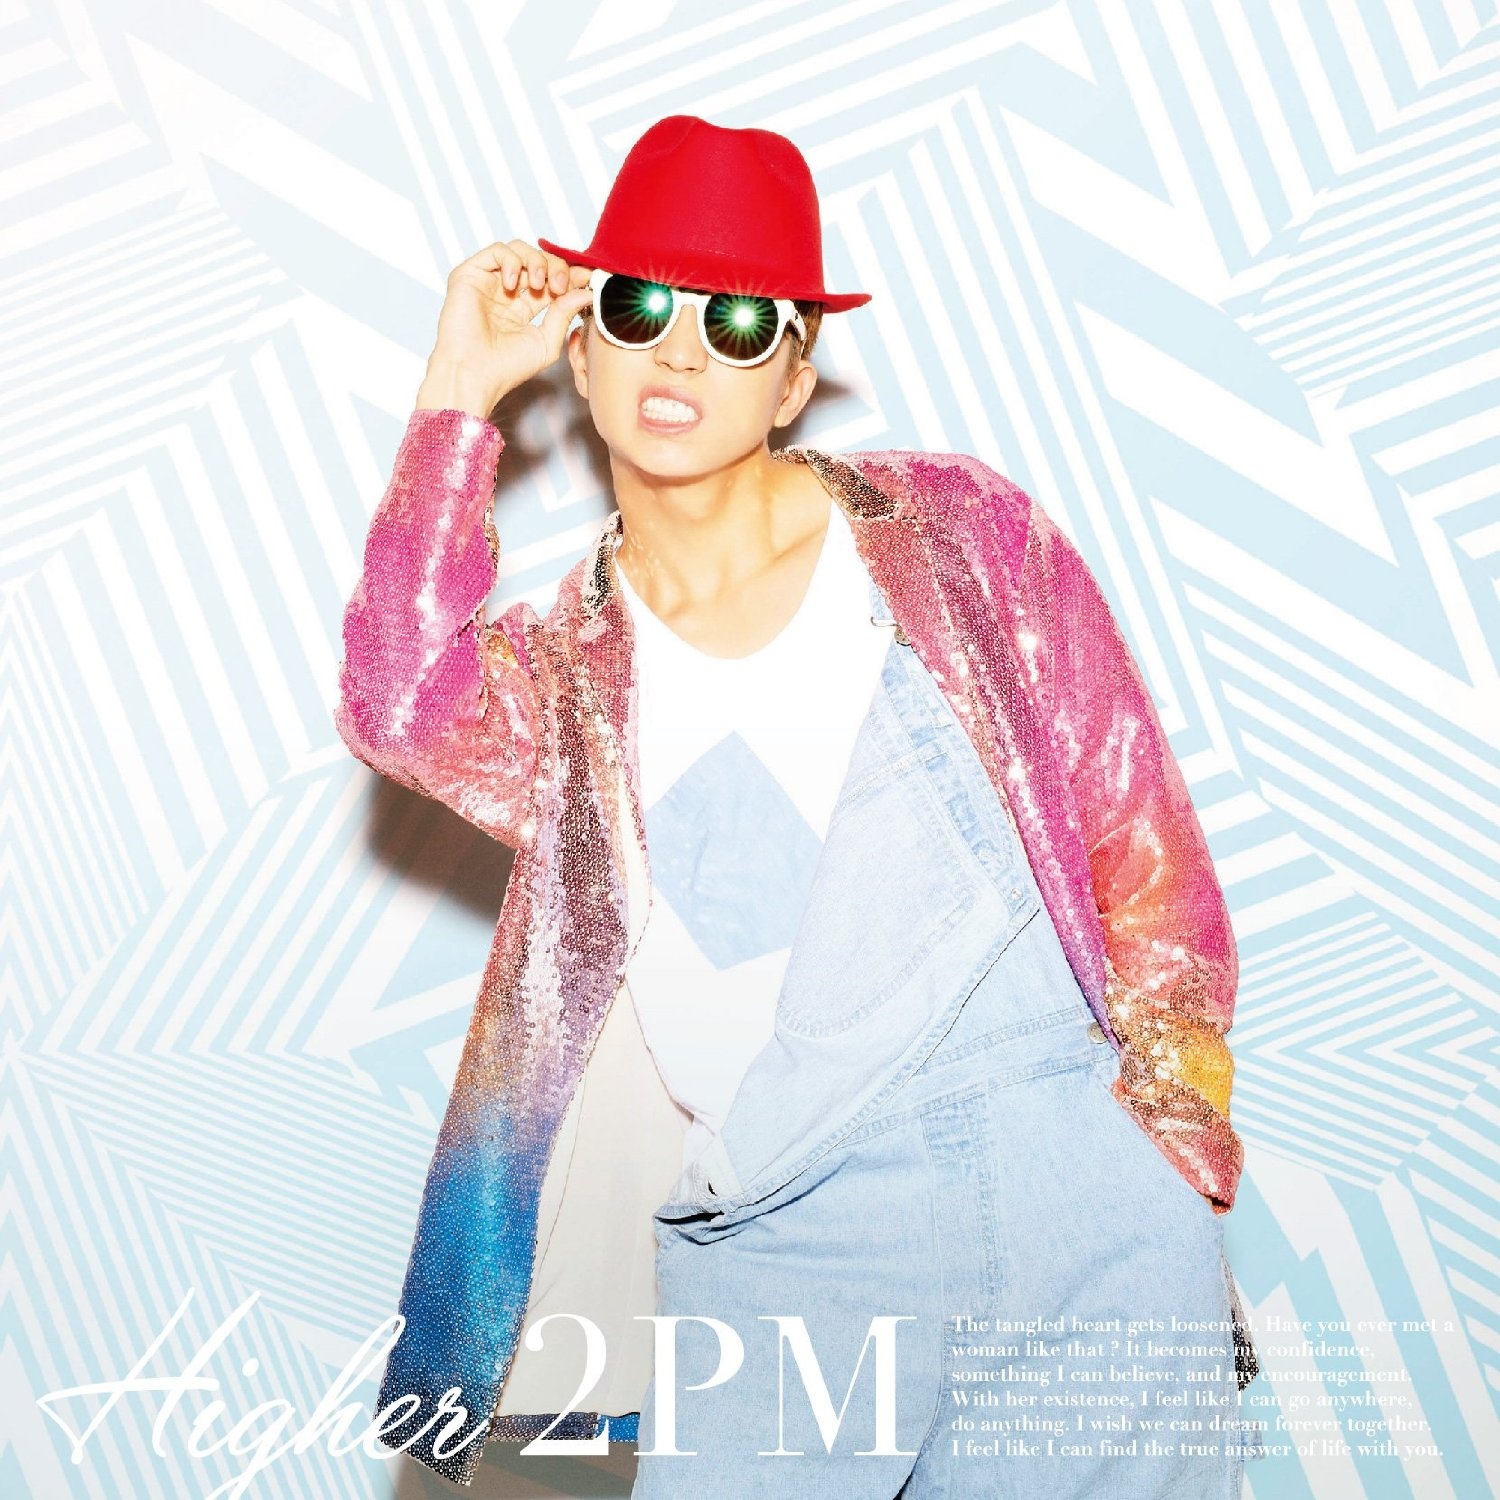 HIGHER Wooyoung pan